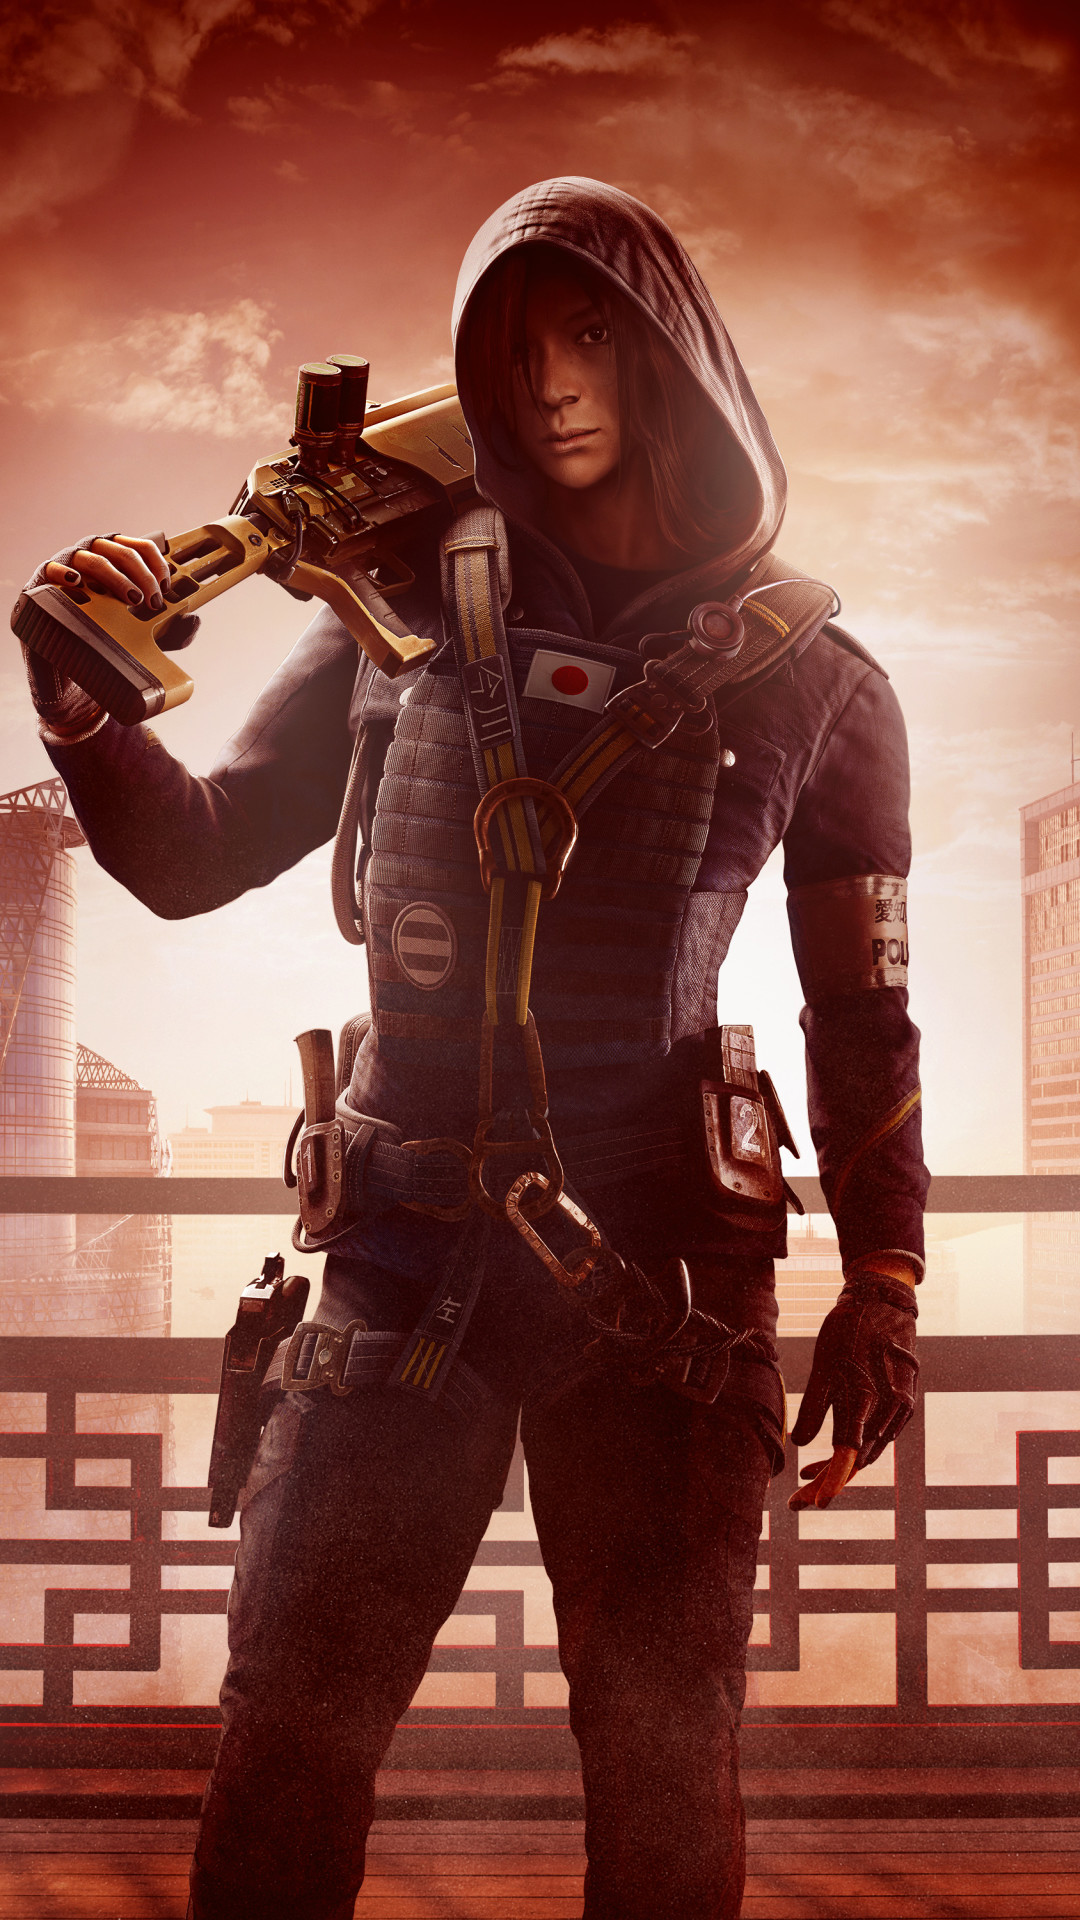 rainbow six wallpaper,movie,action film,fictional character,cg artwork,action adventure game